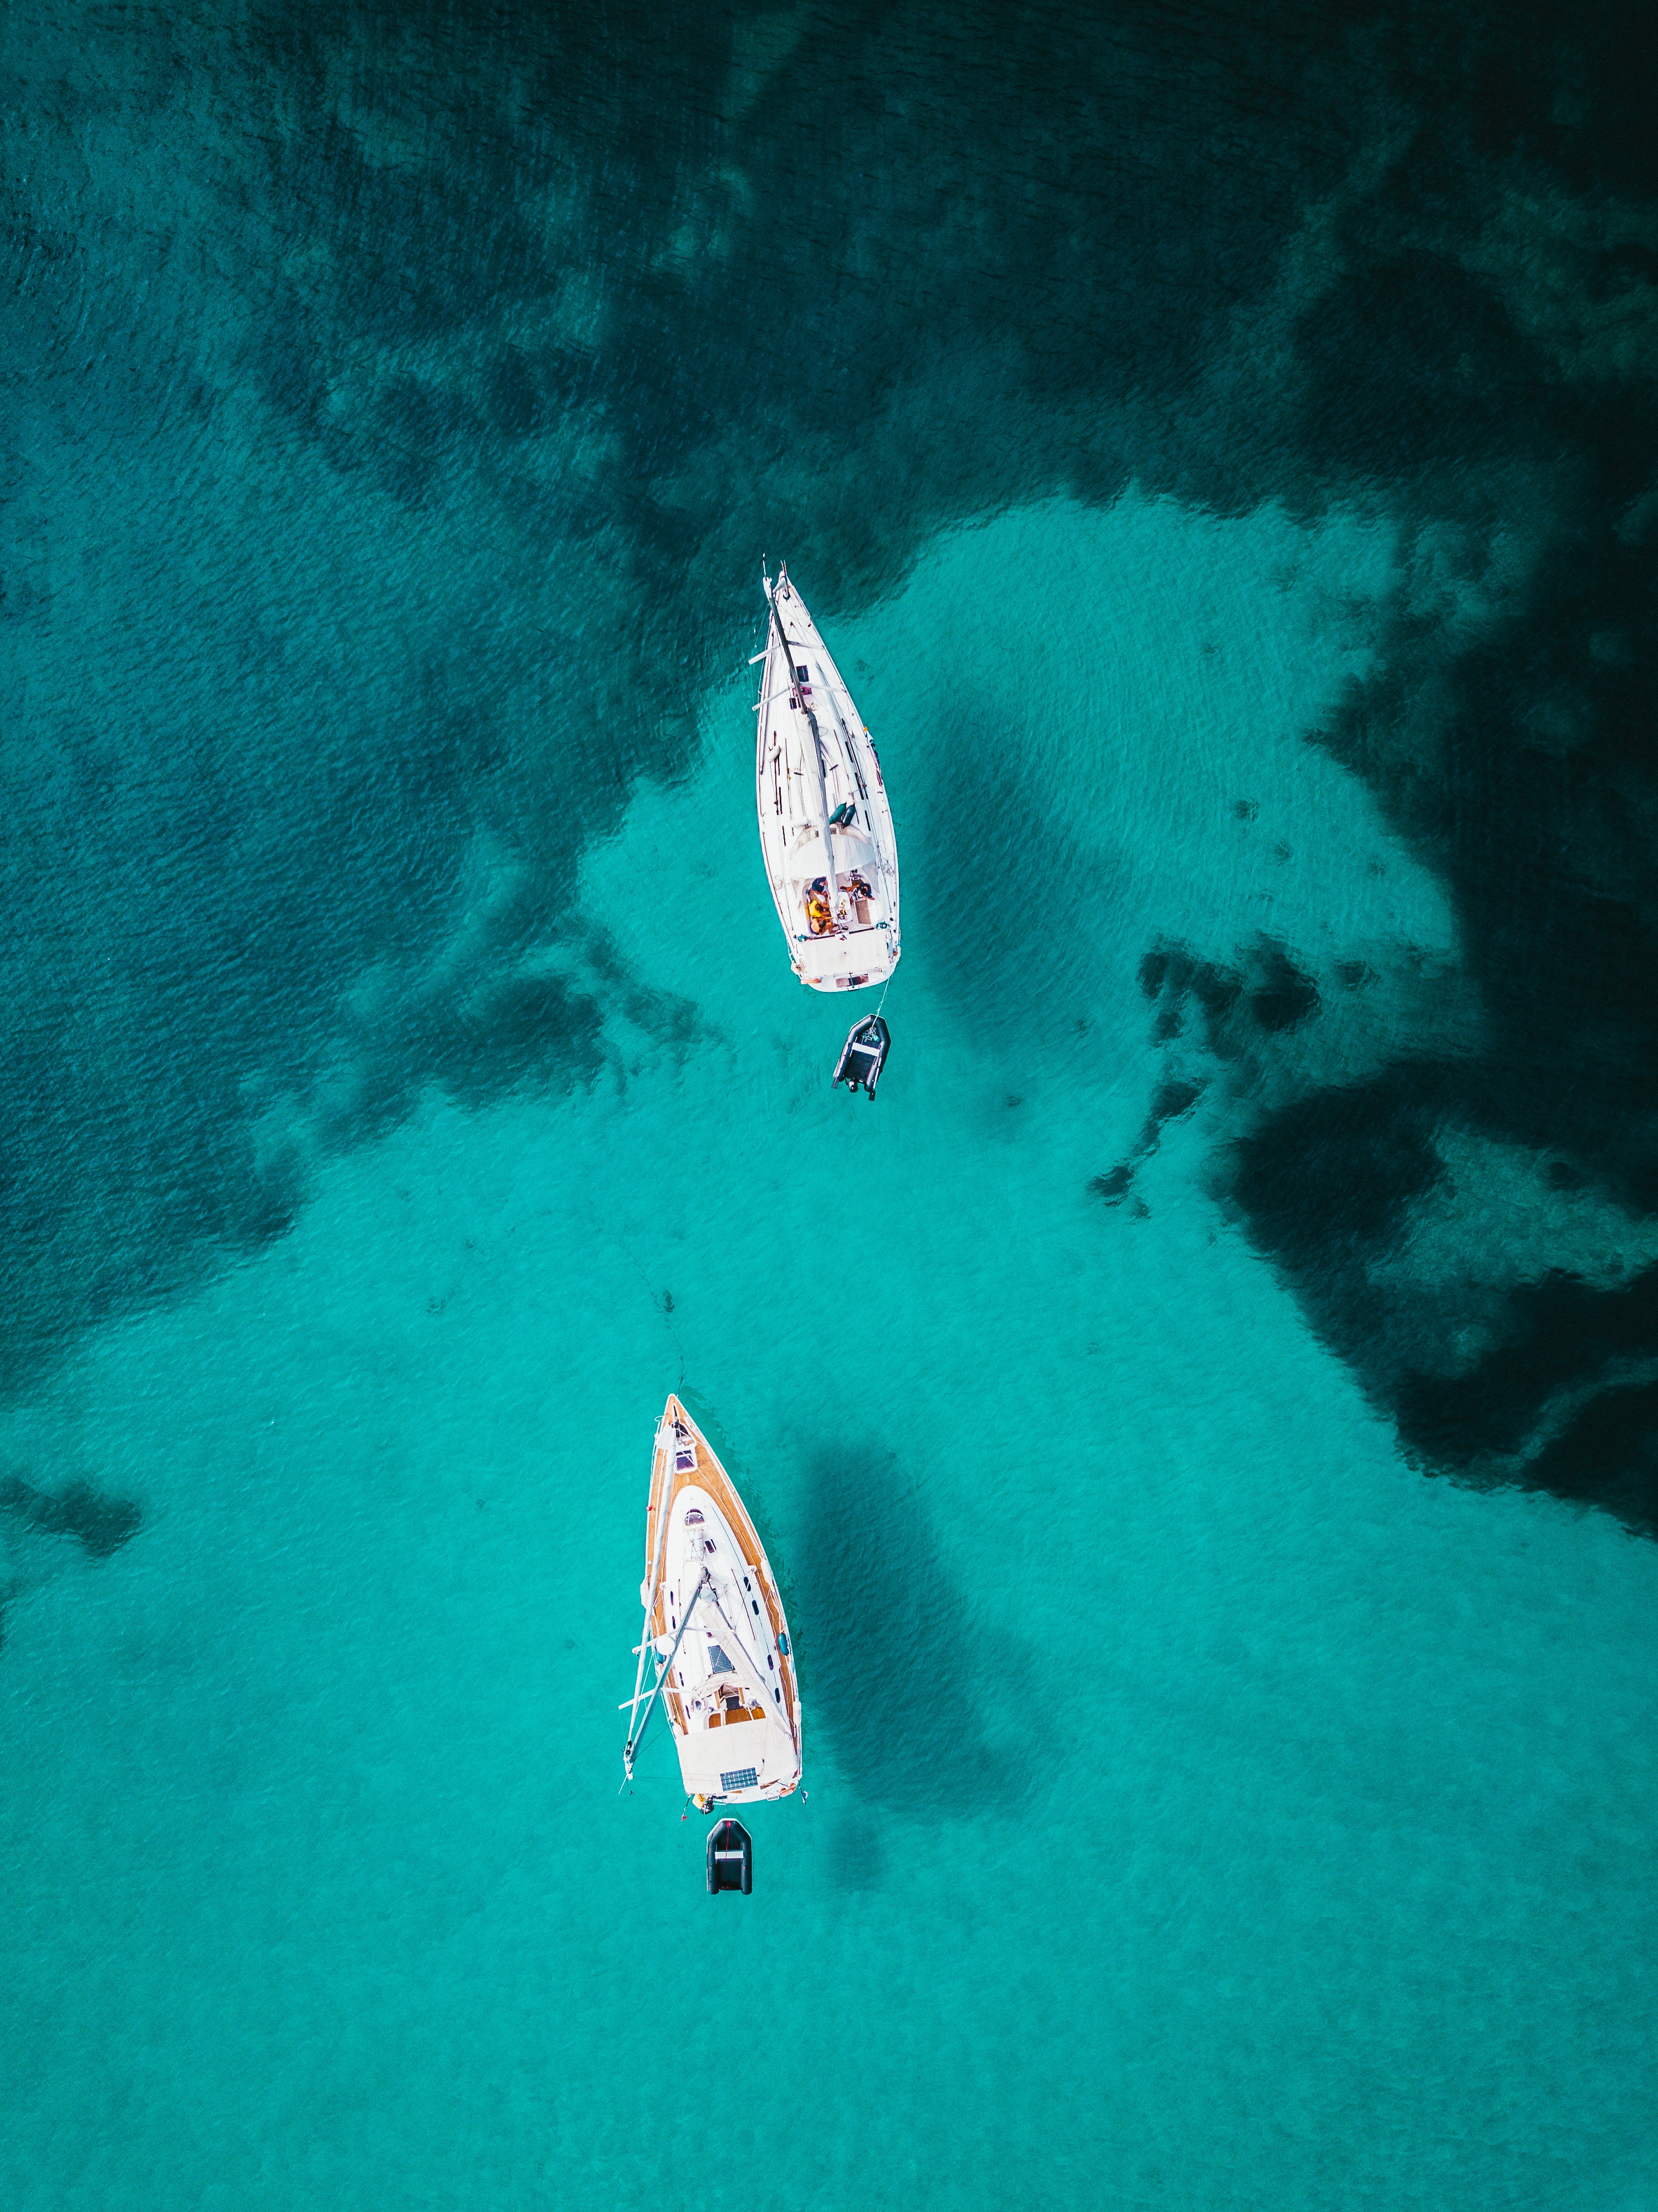 boats, nature, water, view from above, ocean